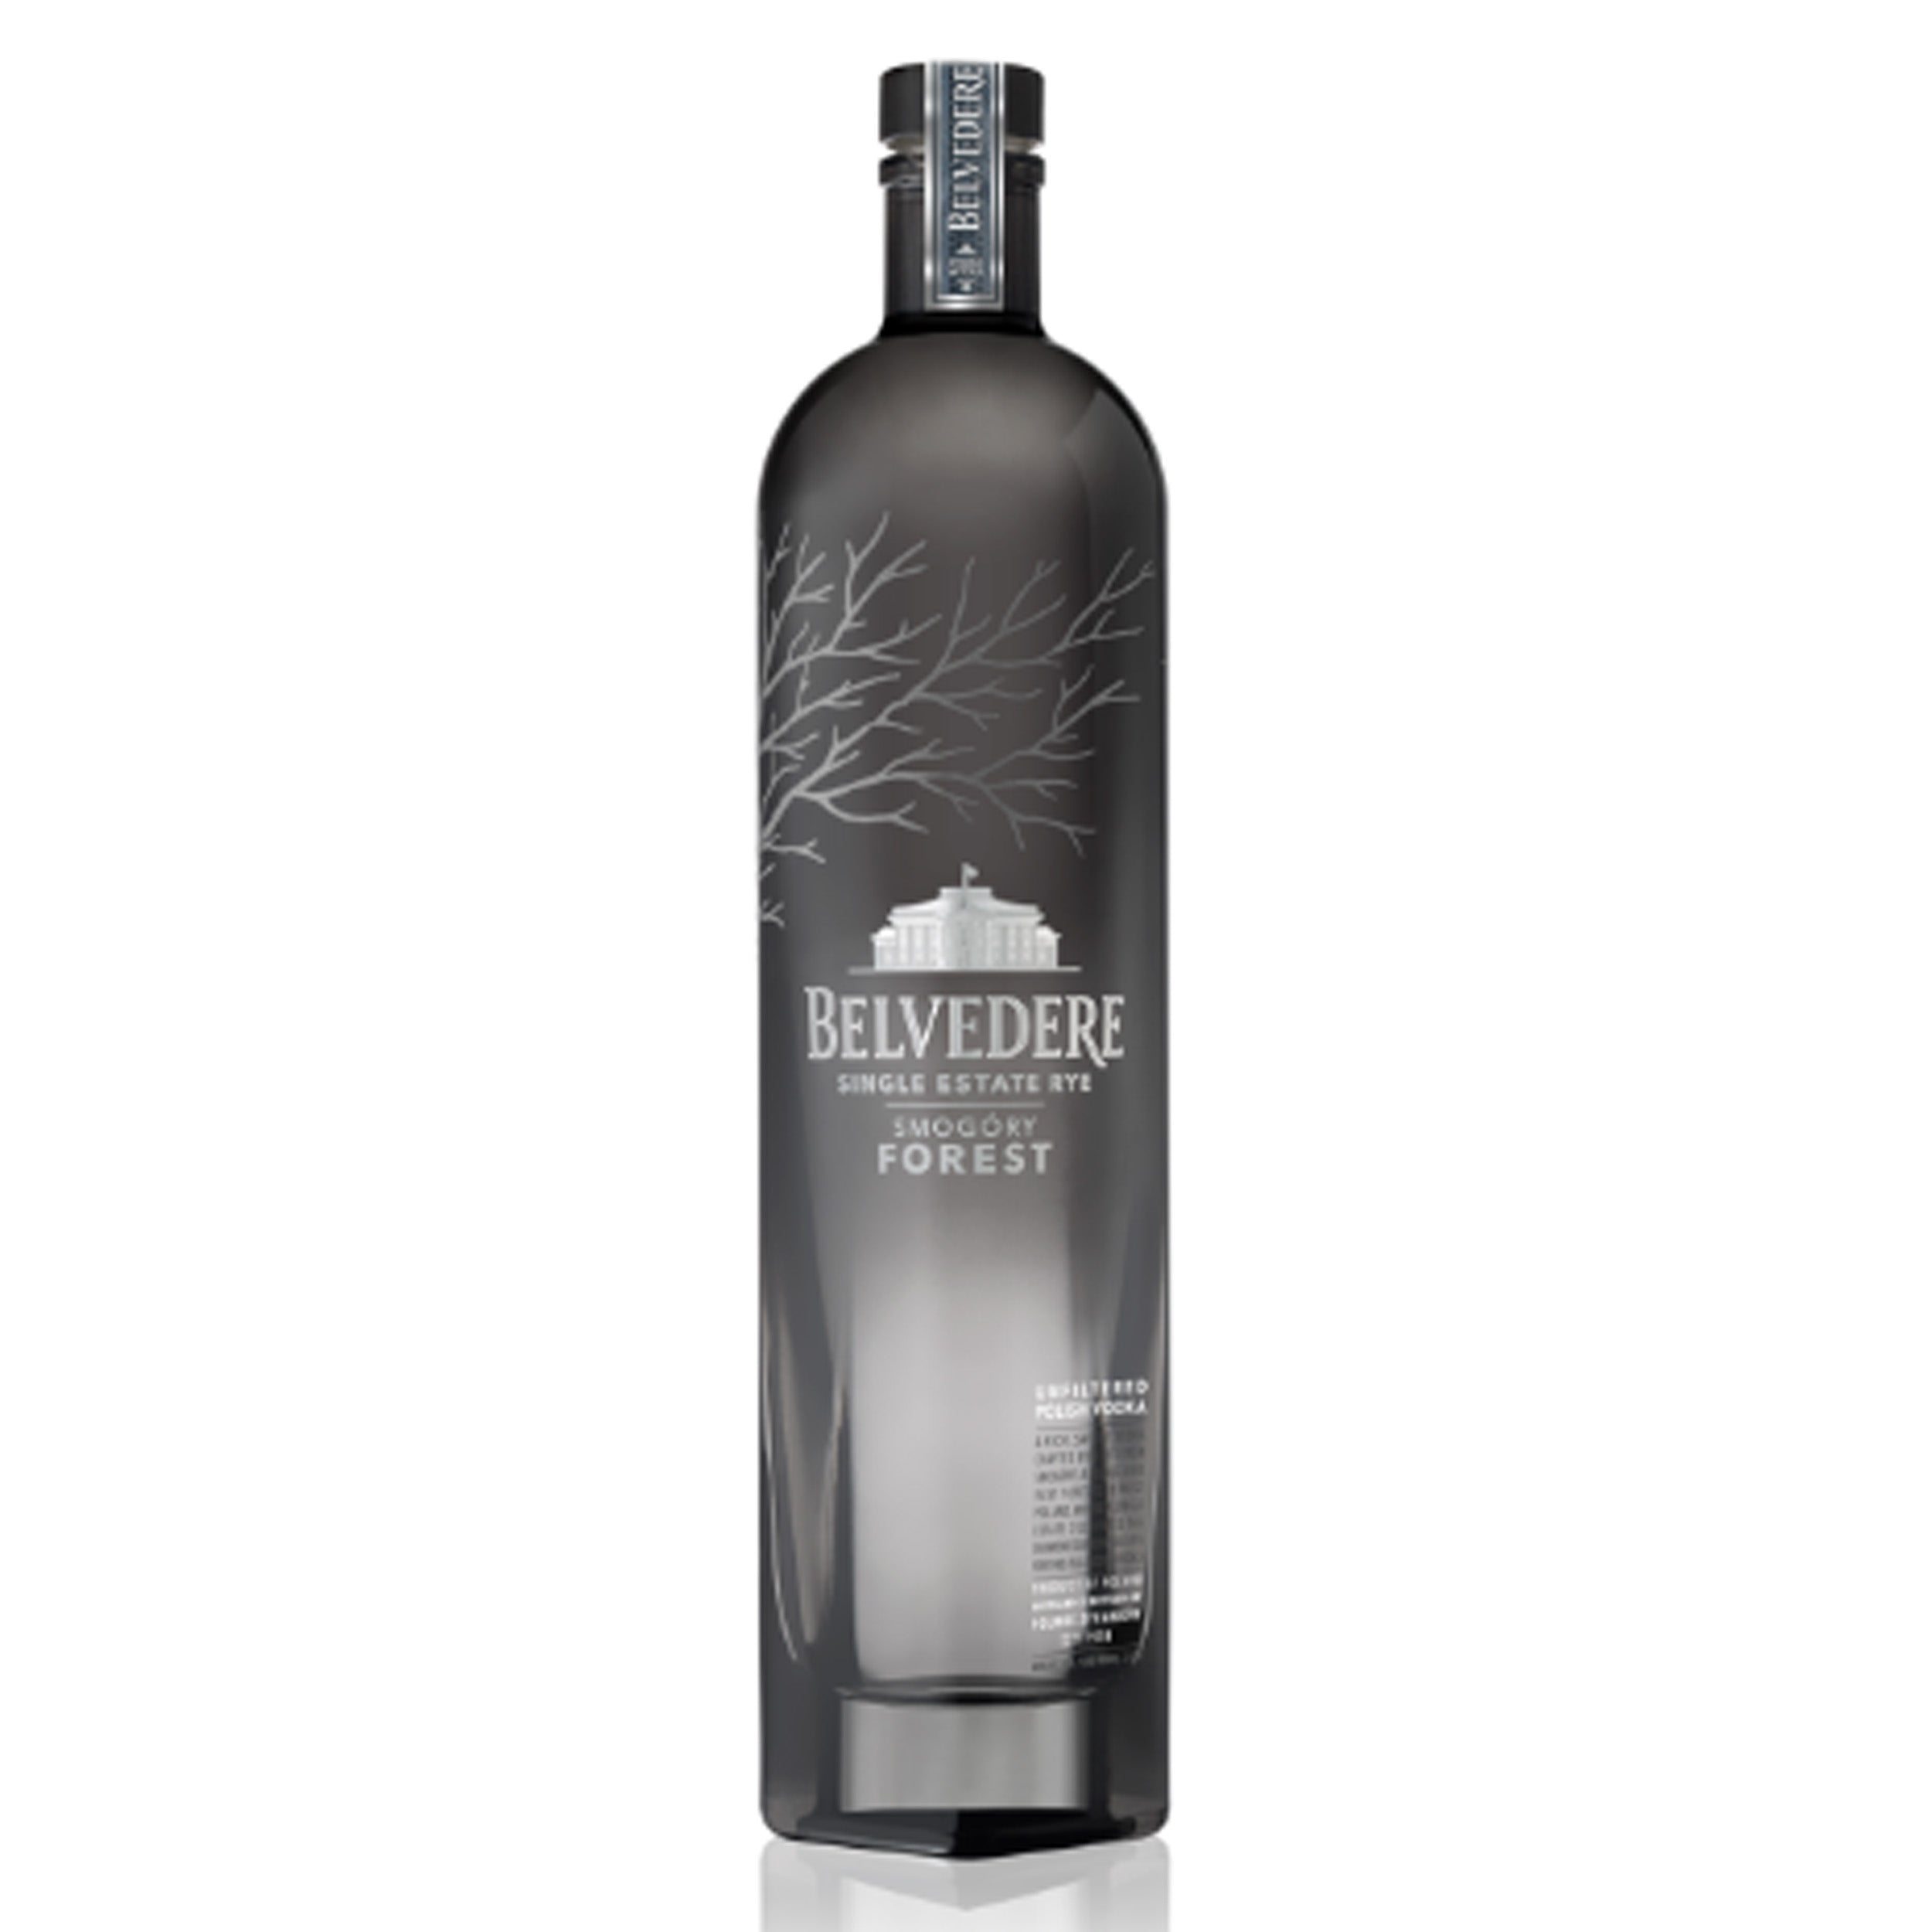 Belvedere Organic Infusions Brings Some Exciting New Flavours To Summer